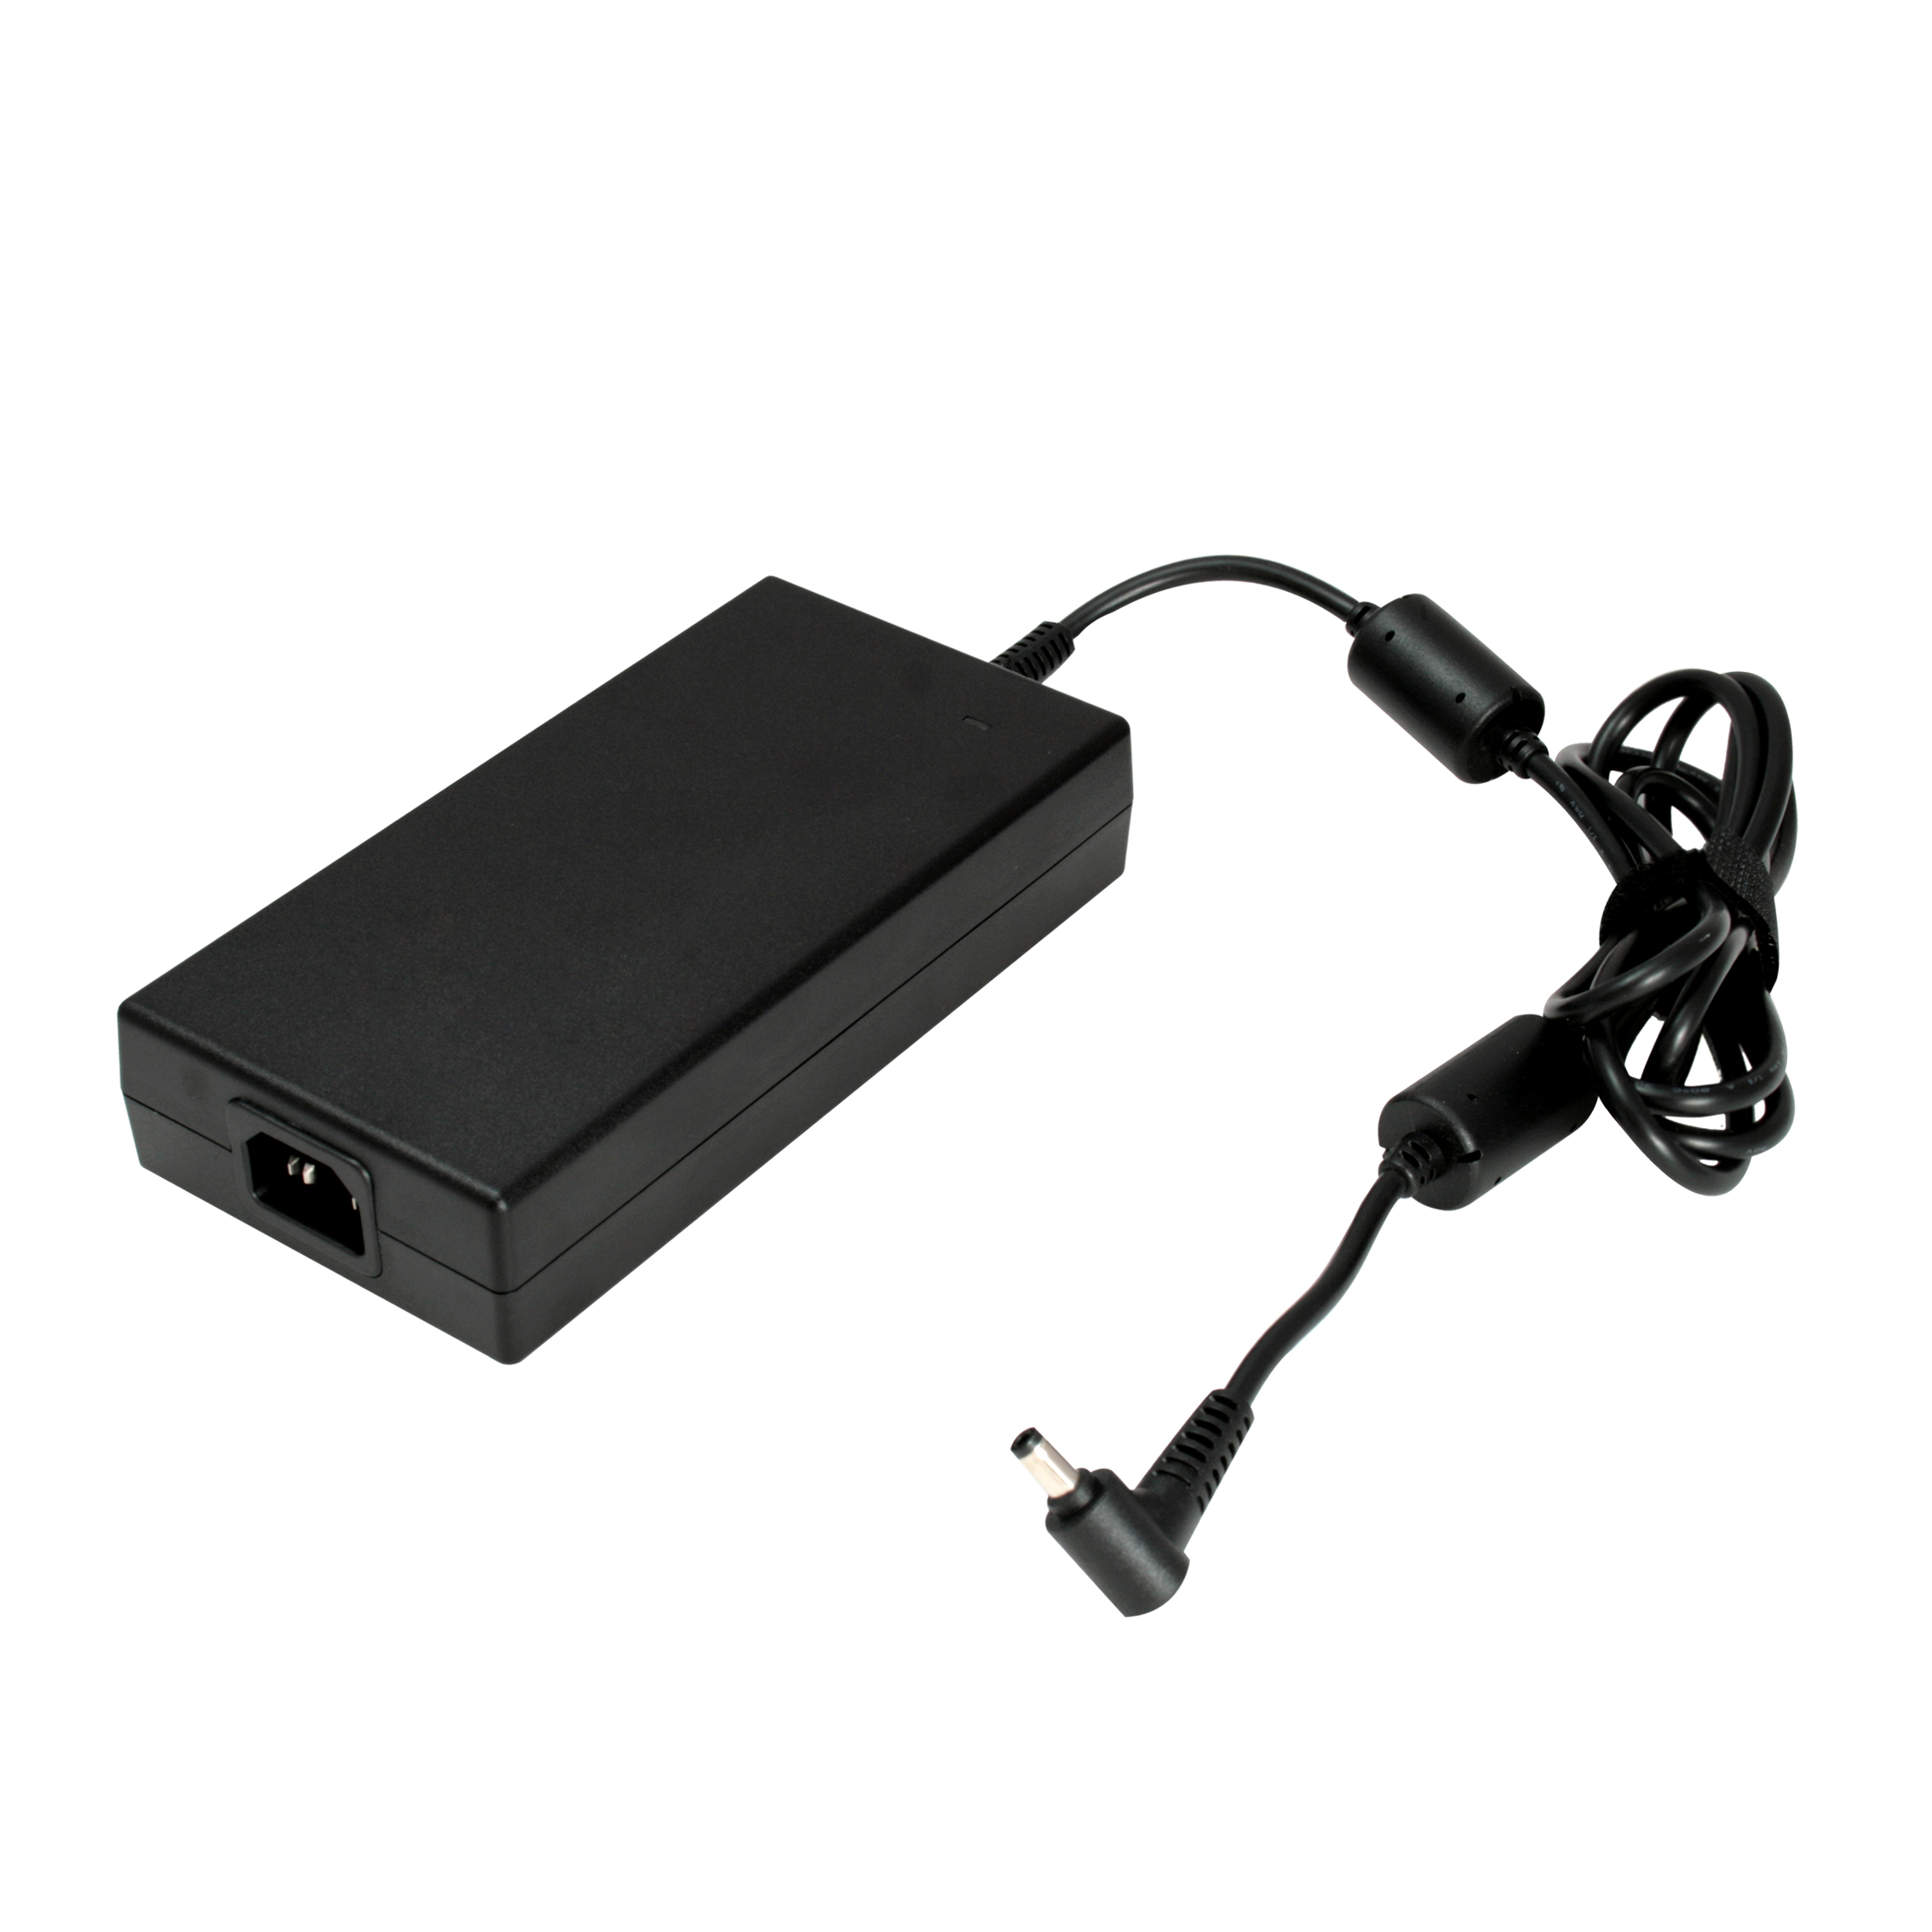 Additional 180W power adapter